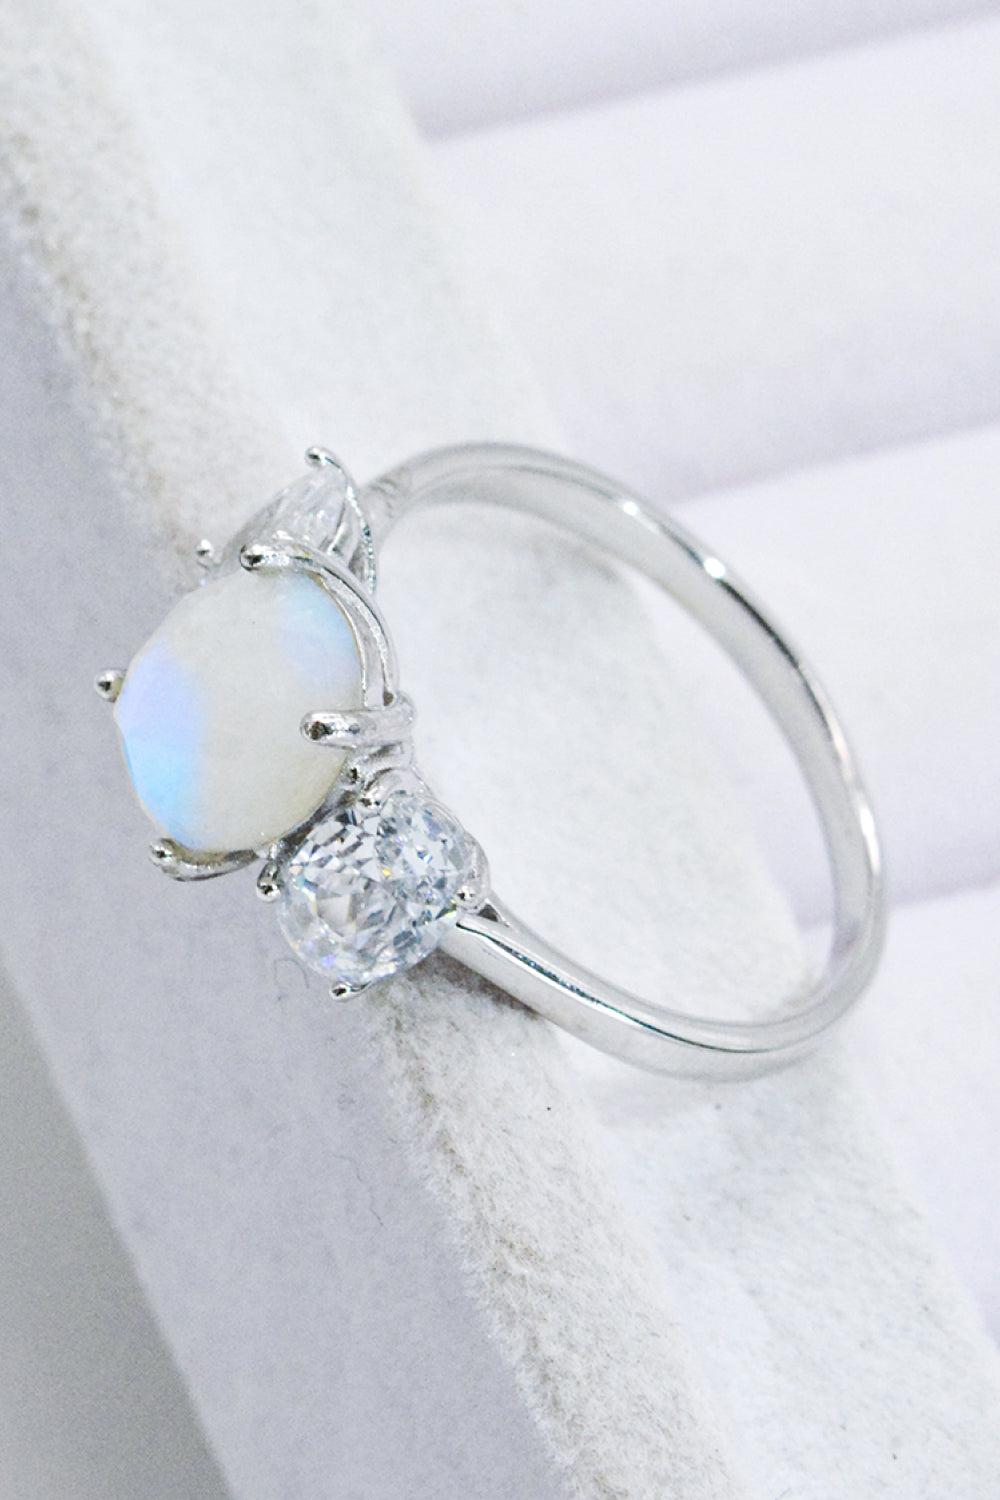 Natural Moonstone and Zircon Ring BLUE ZONE PLANET